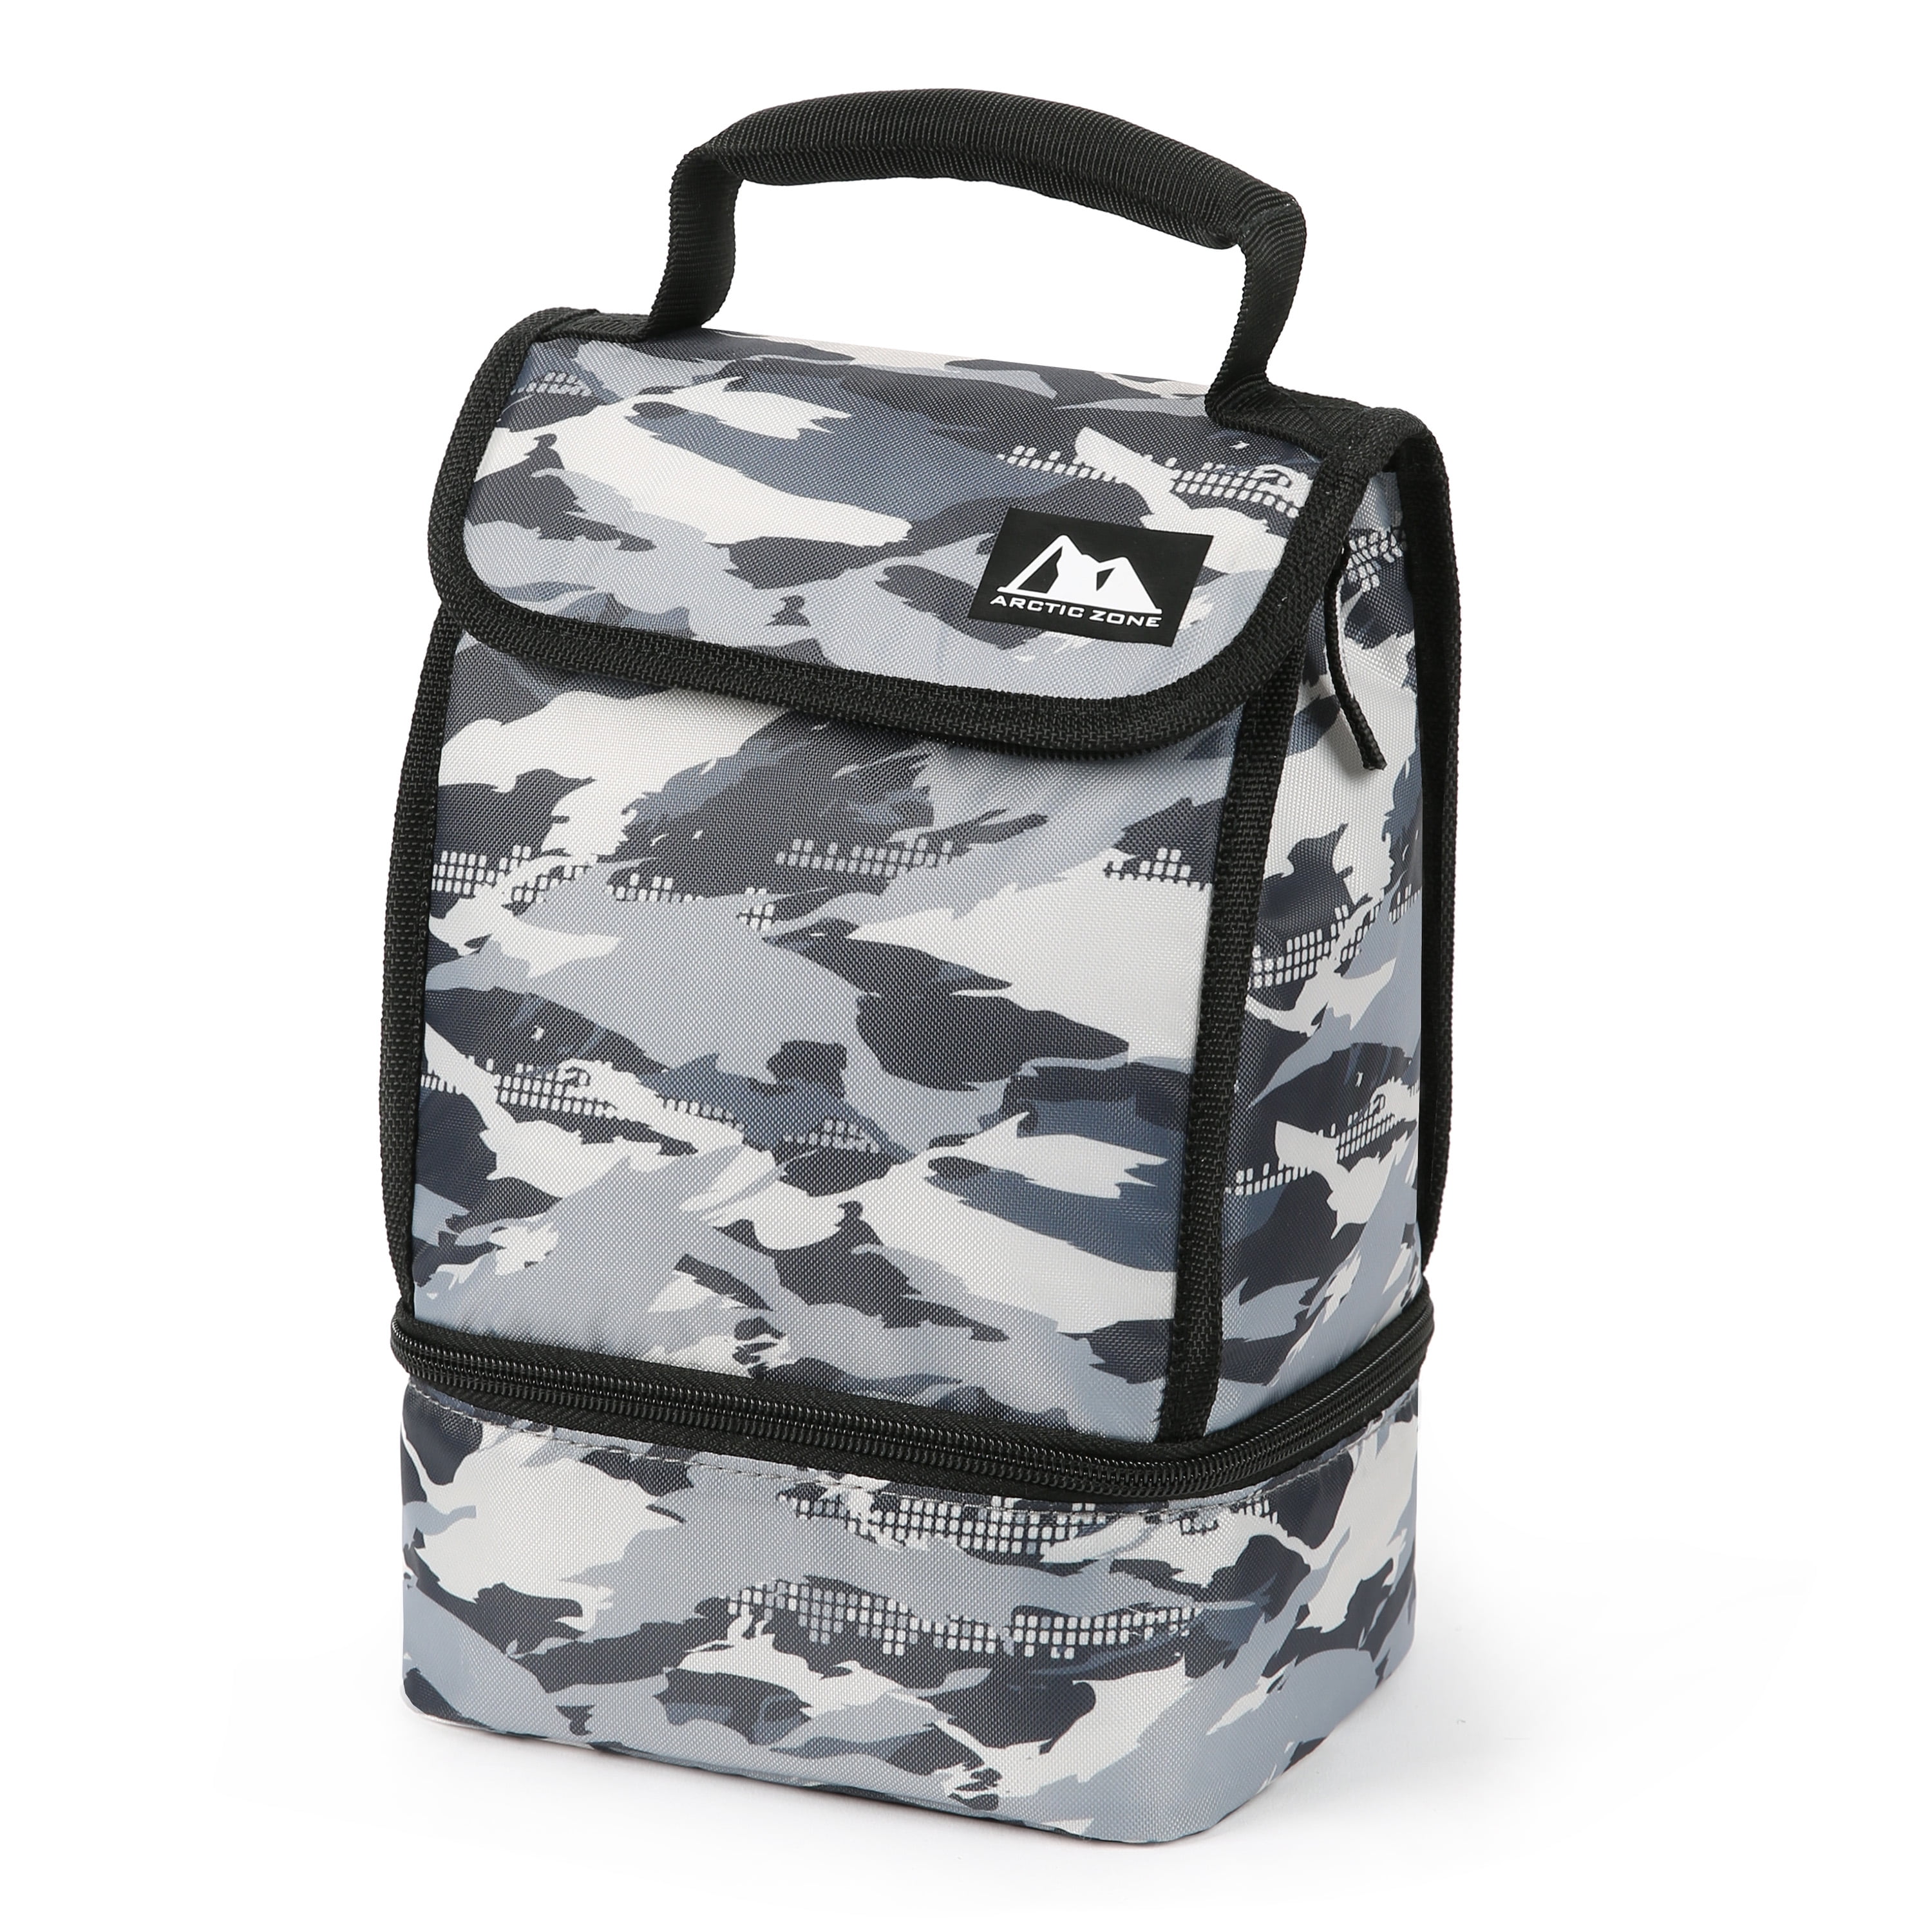 557 Arctic Zone Camo Insulated Lunch Bag New With Tags And Ice Pack 